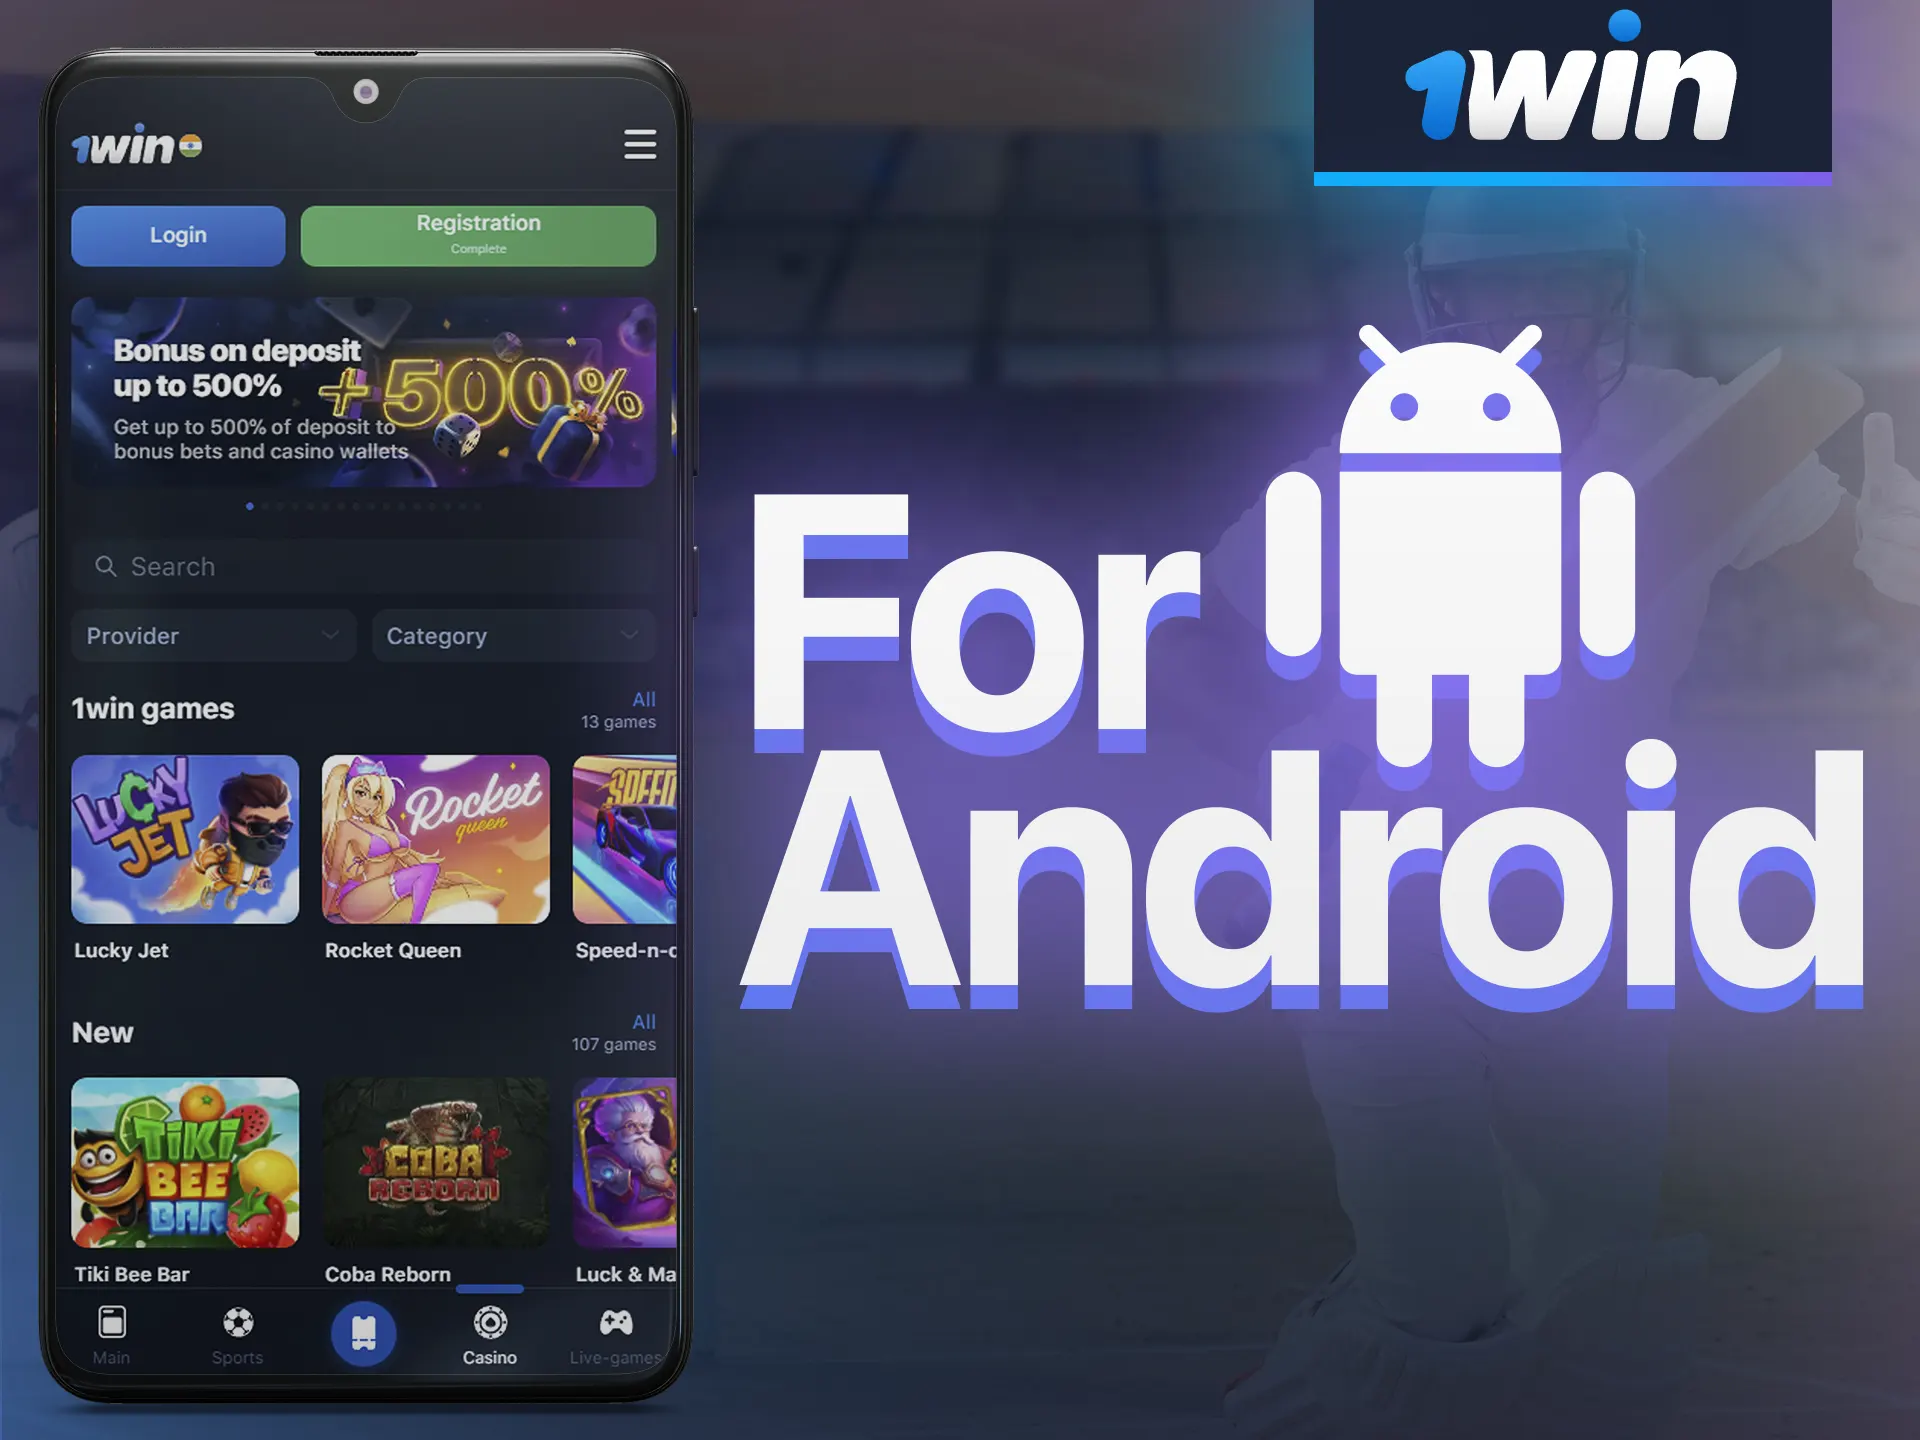 The 1win mobile app is compatible with Android devices, and users can download the software from the 1win website for free.